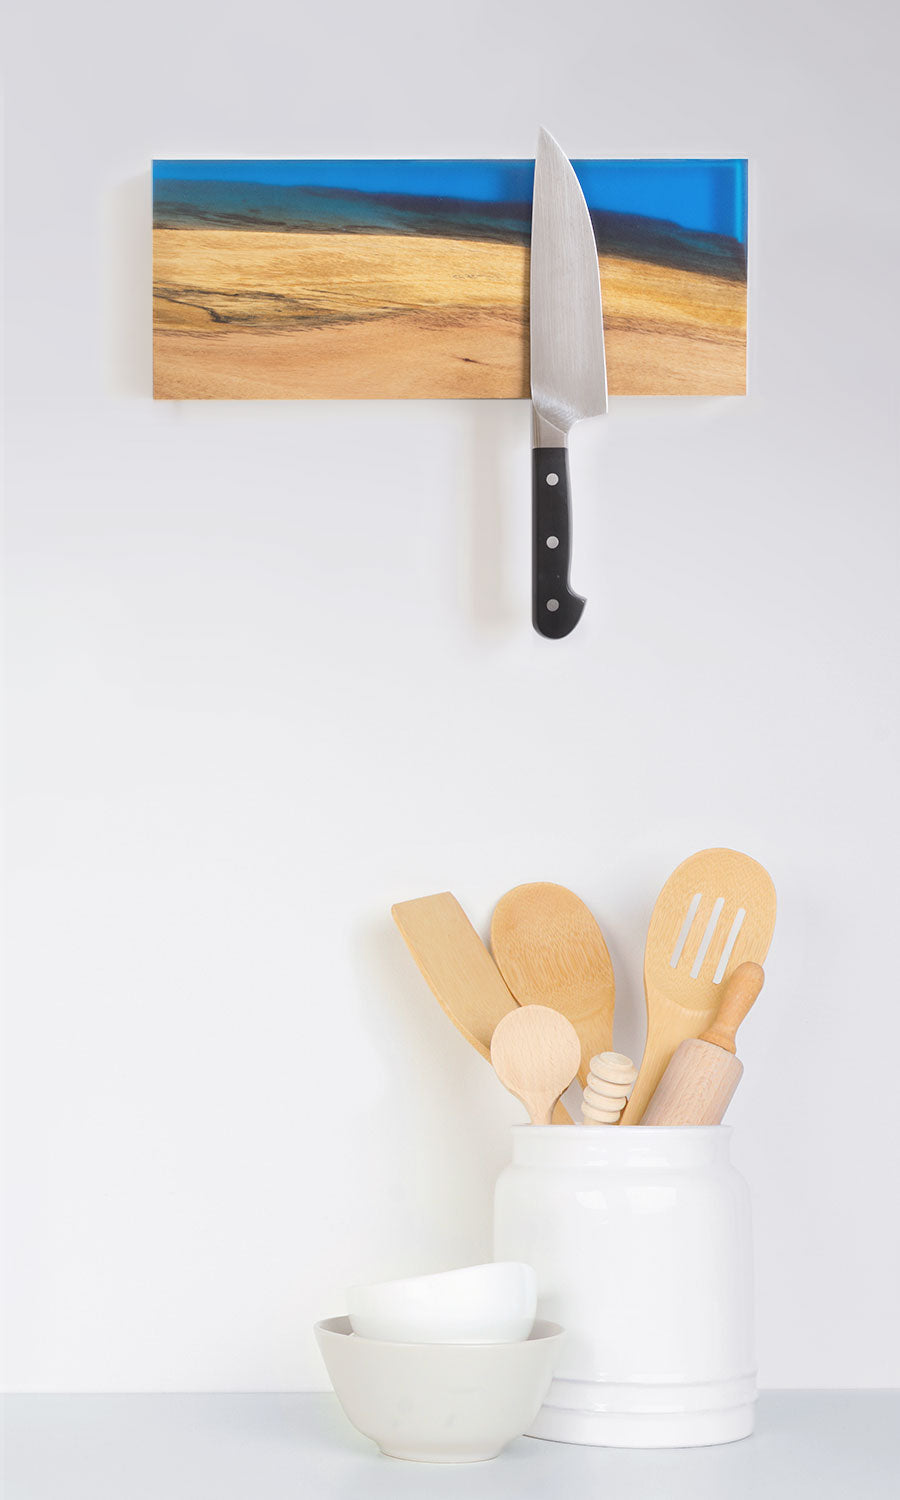 https://knife-en-place.com/cdn/shop/files/live-edge-wooden-magnetic-knife-strip-acacia-wood-and-blue-epoxy-resin-in-white-stylish-kitchen_3d4d3365-2b01-4e6a-a4fe-bd3f5c49947c_1600x.jpg?v=1629867887